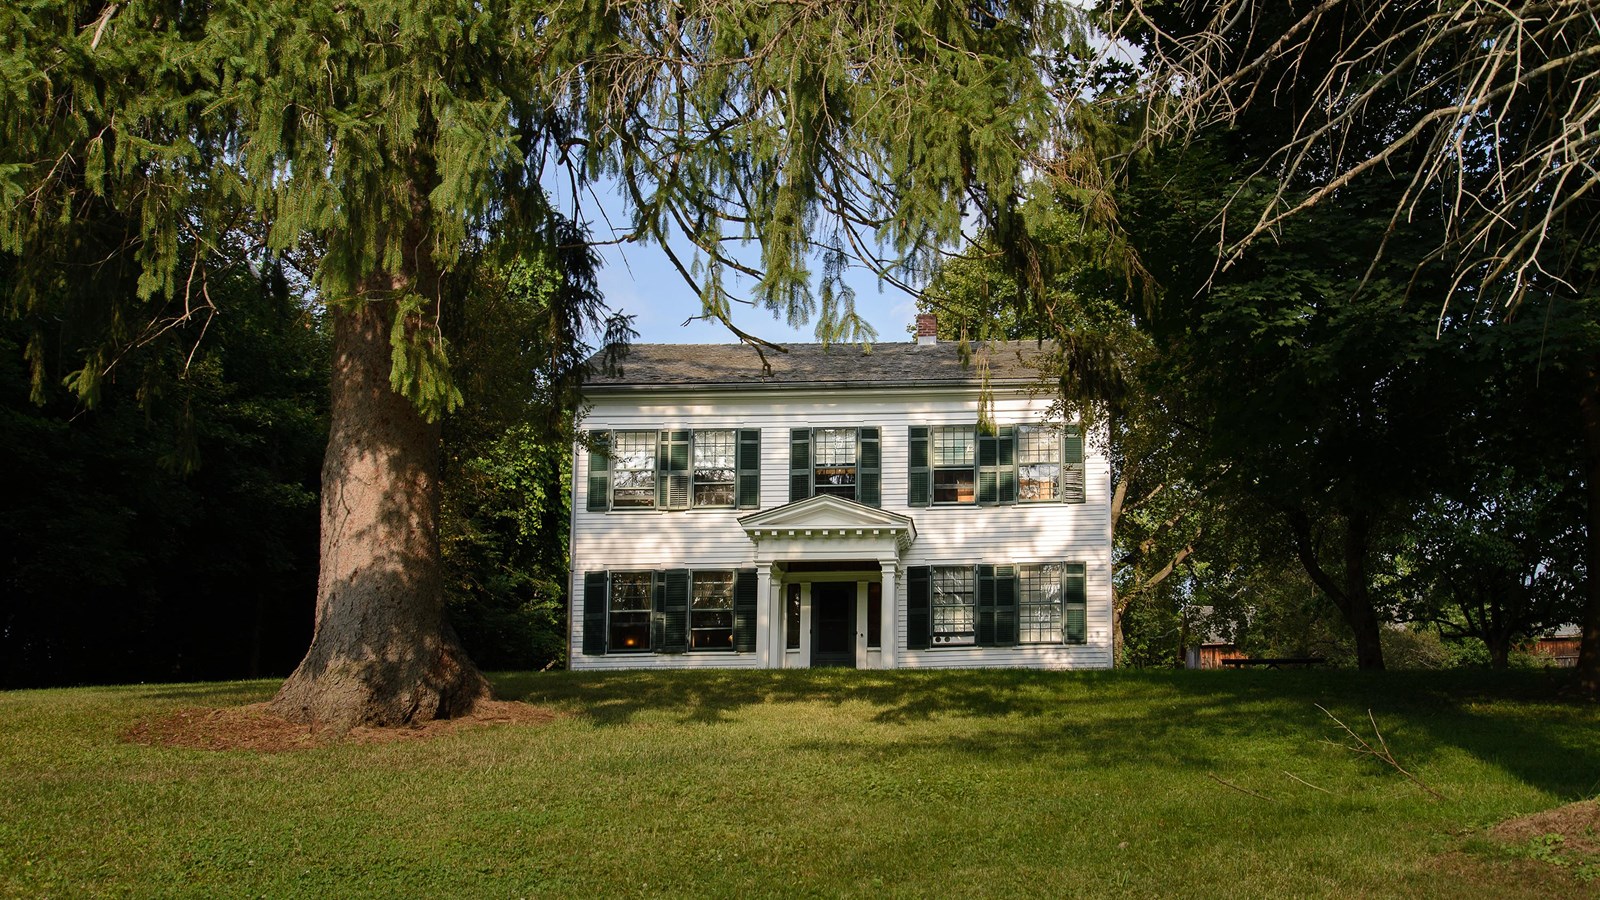 A historic white house with green shutters and door sits atop a low hill, surrounded by tall trees.